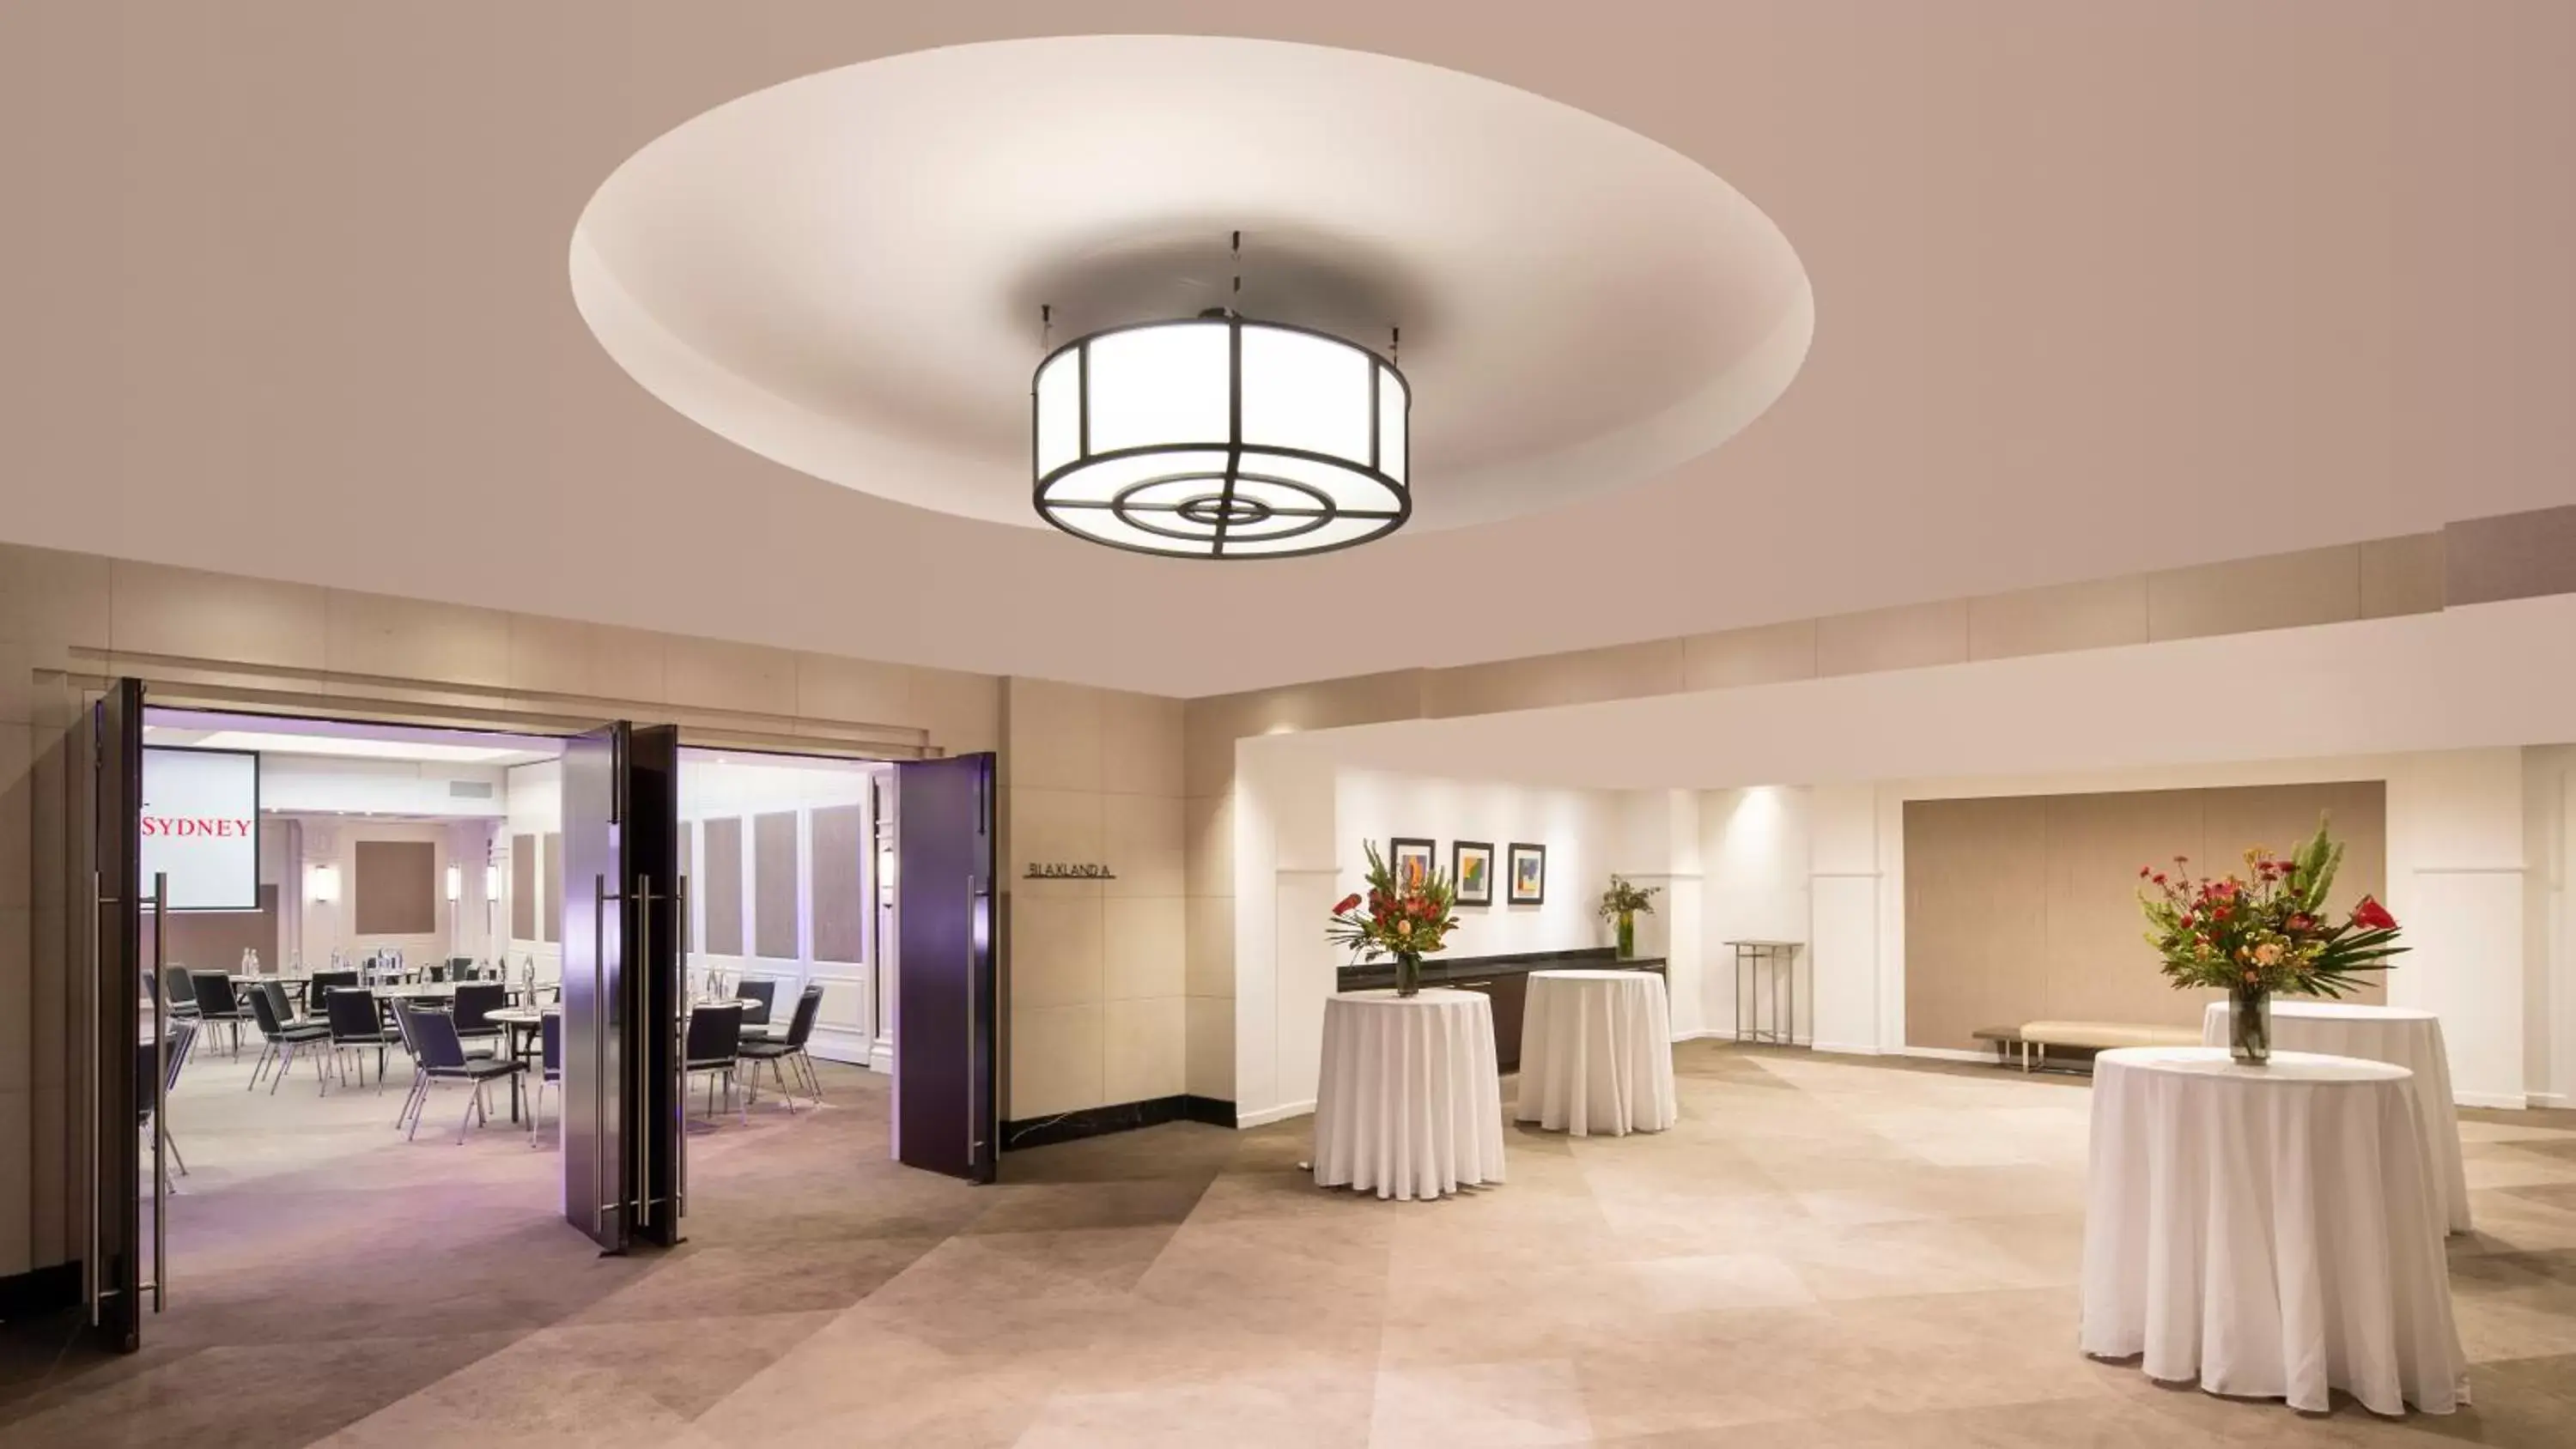 Meeting/conference room, Banquet Facilities in Swissotel Sydney